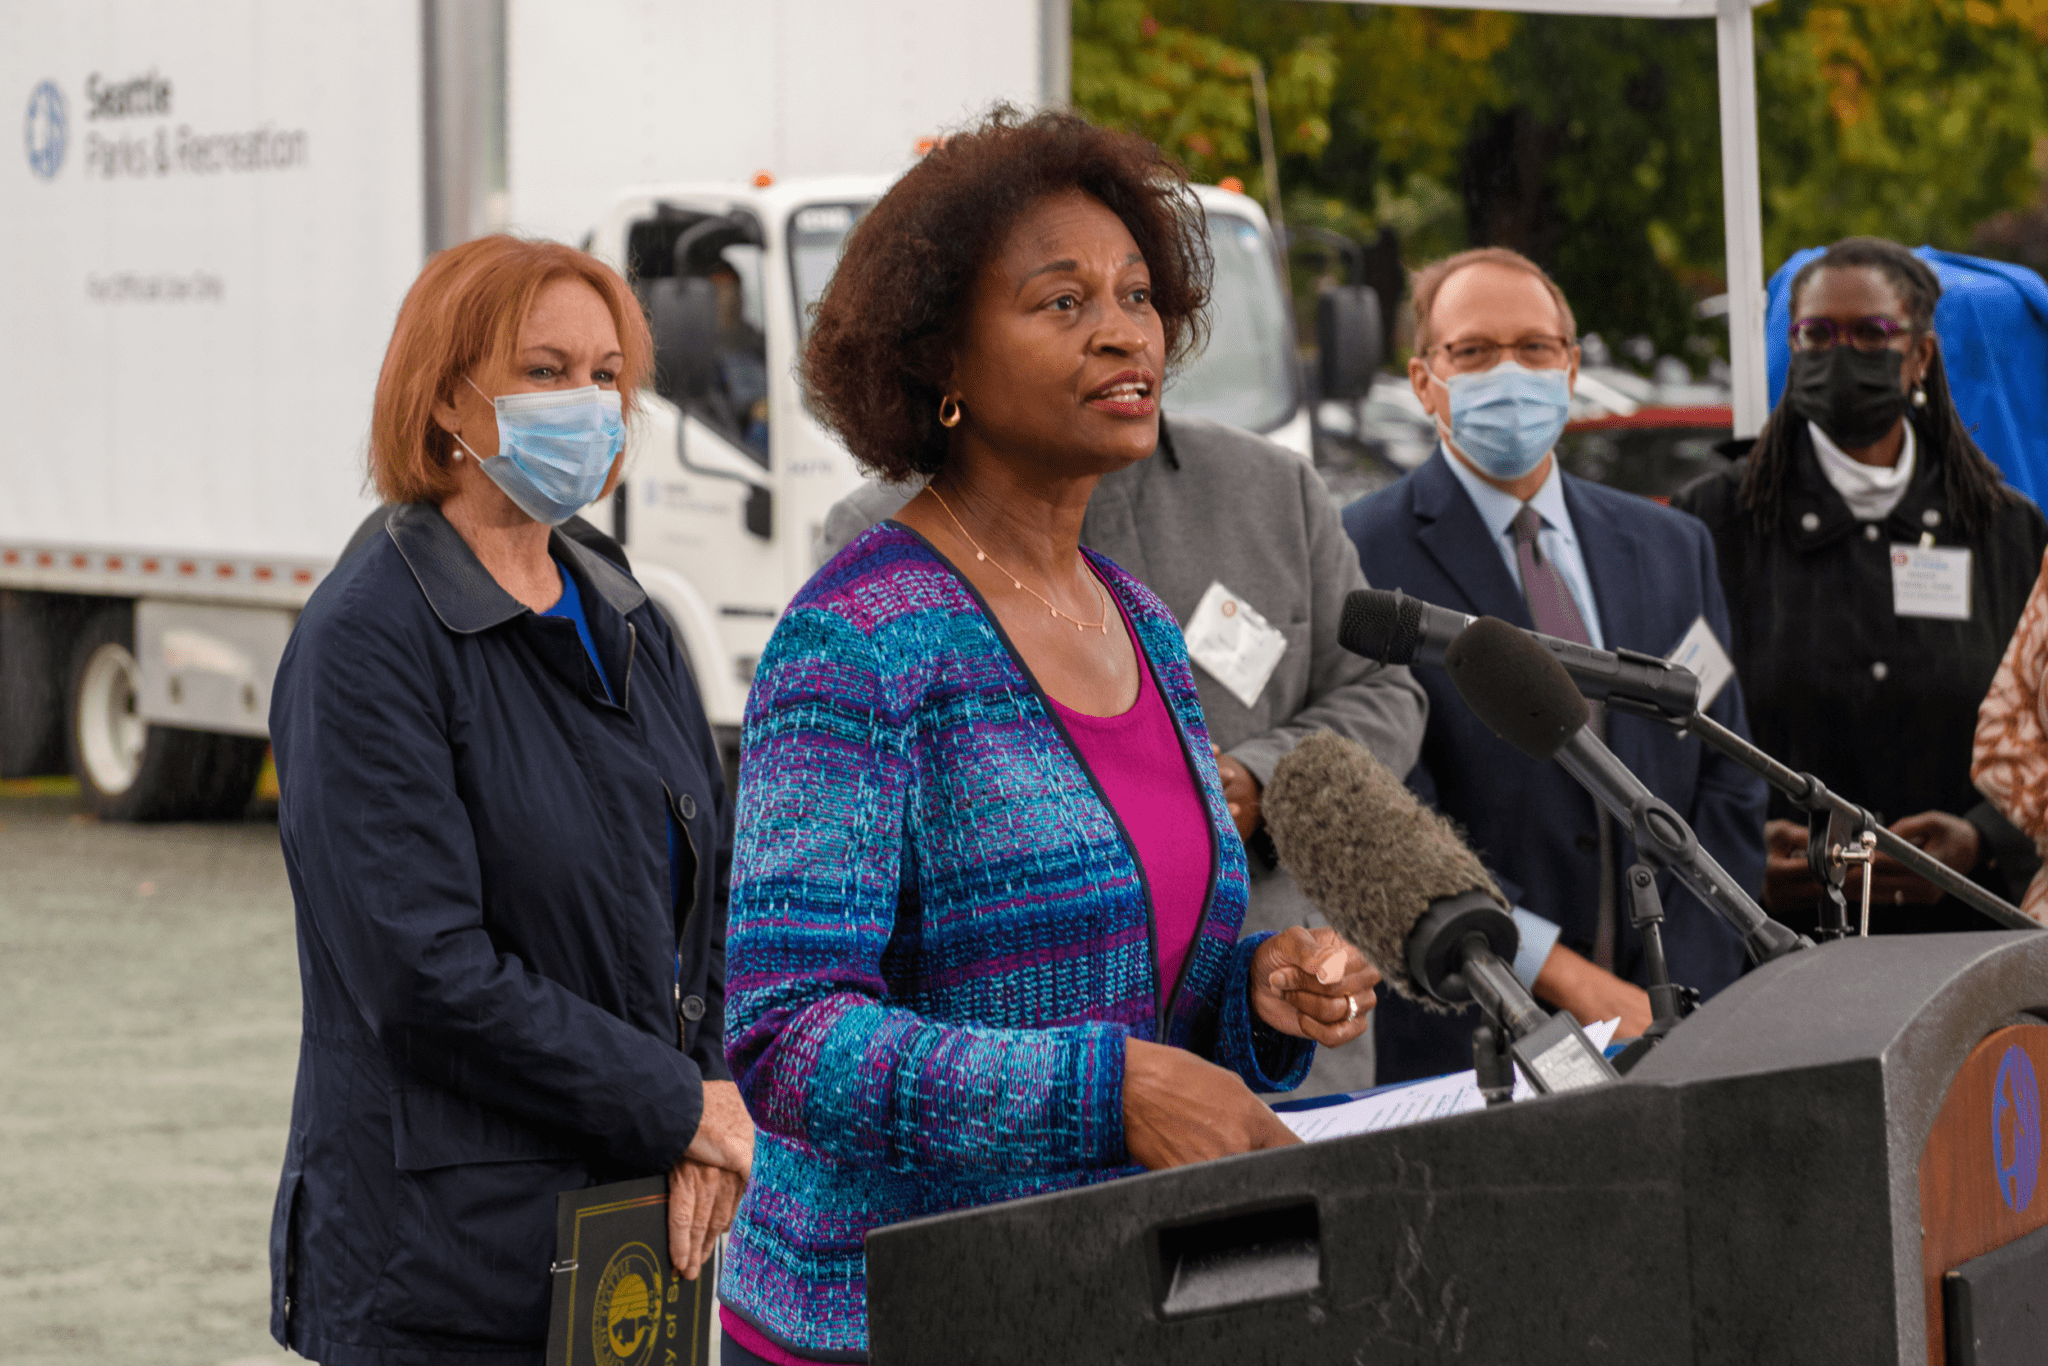 Nuria Fernandez, Administrator of the Federal Transit Administration, shares remarks with the media at a podium during a groundbreaking event in Seattle. Additional agency representatives and elected officials are visible behind her, to the left and right sides. Several microphones are visible in the foreground, and a white truck is visible in the background.